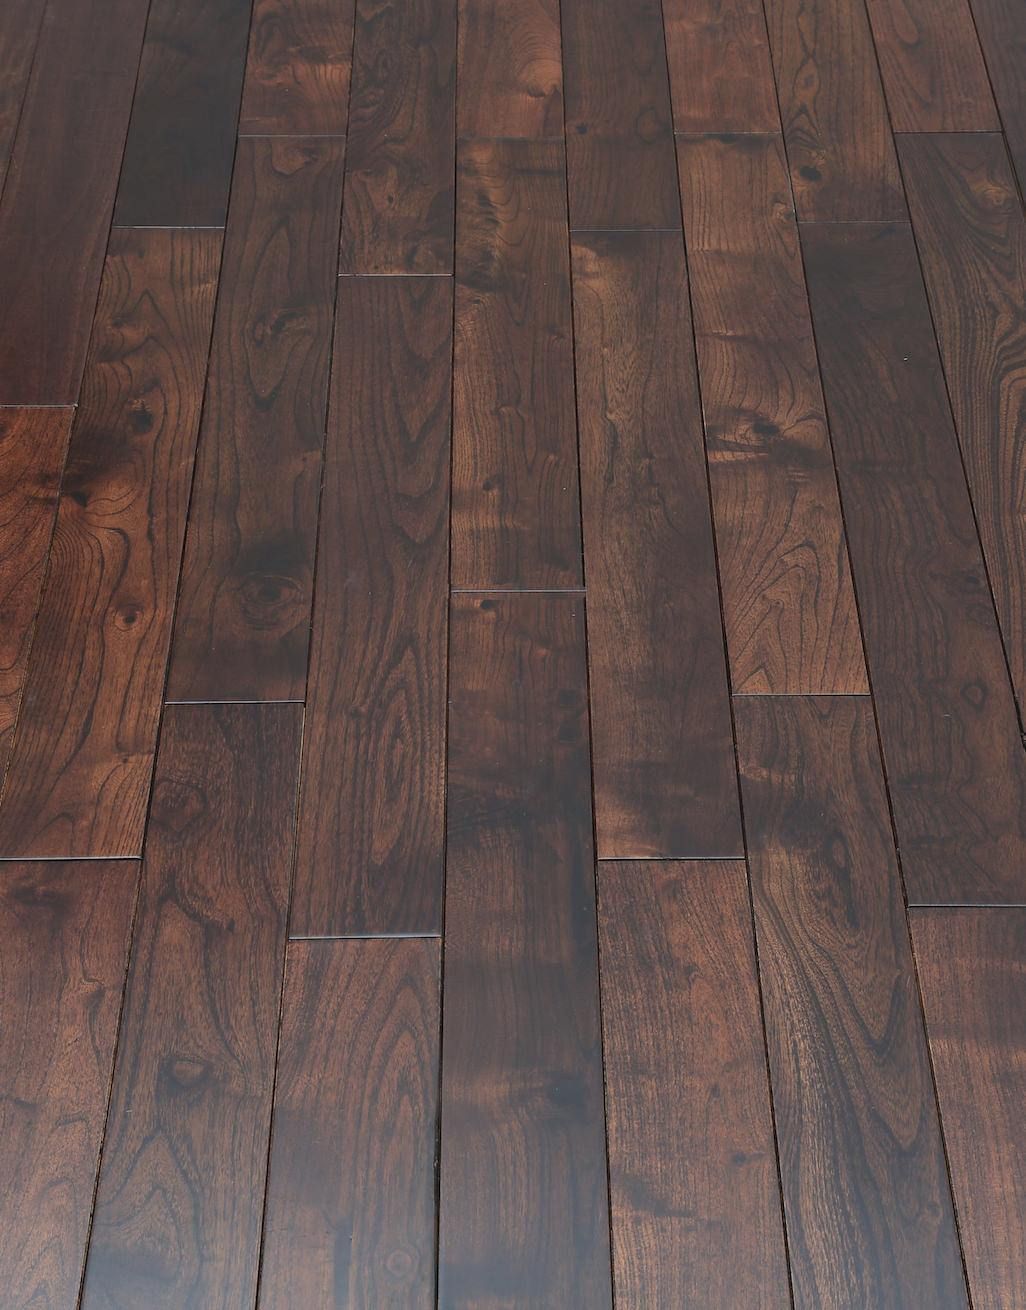 Pacific Mahogany Burgundy Lacquered Solid Wood Flooring Flooring